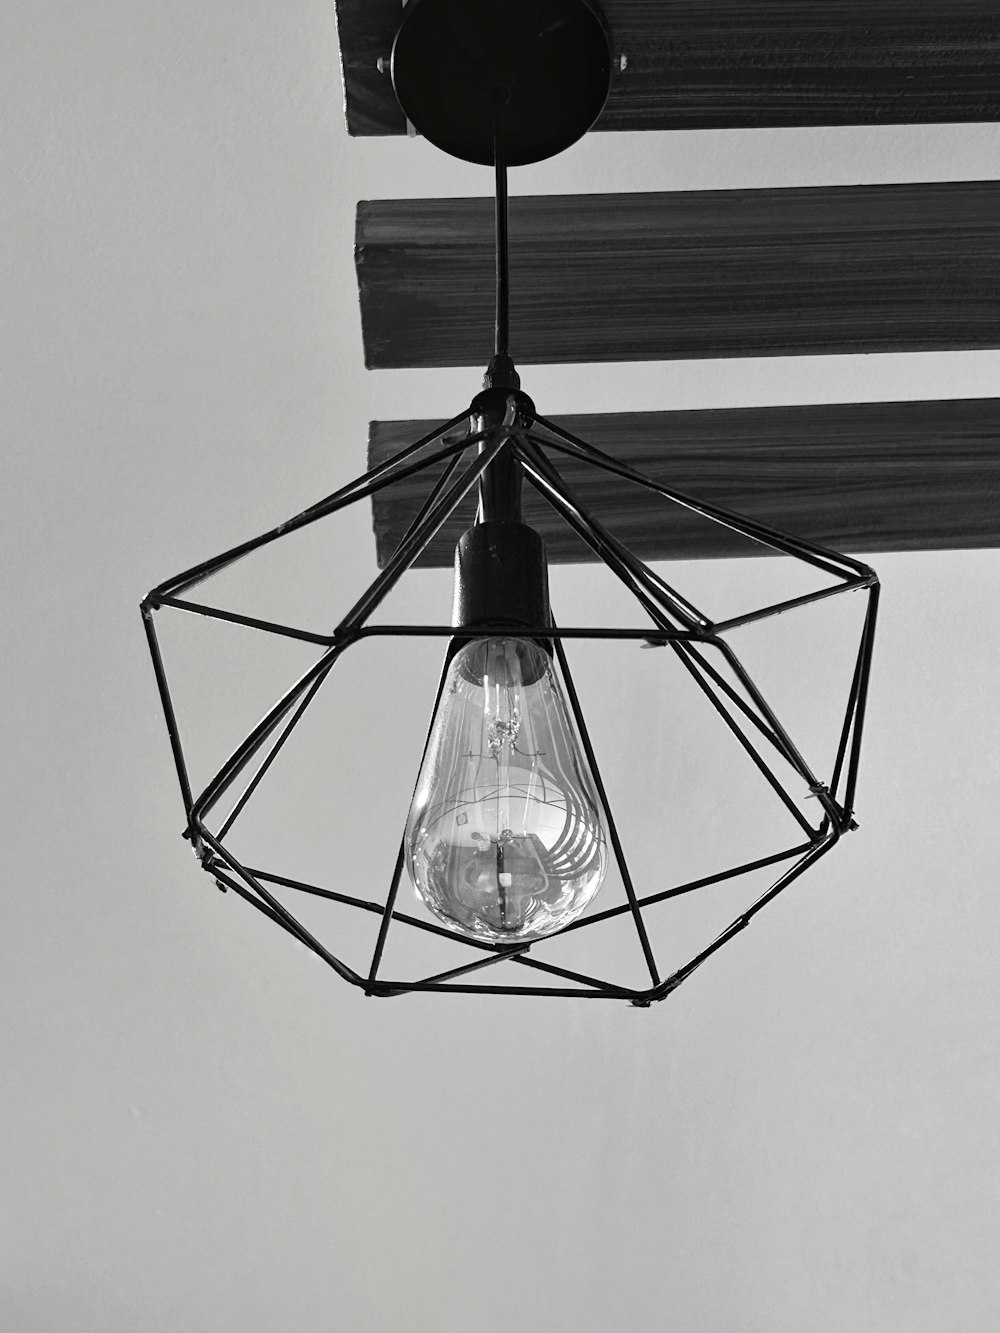 a black and white photo of a light fixture